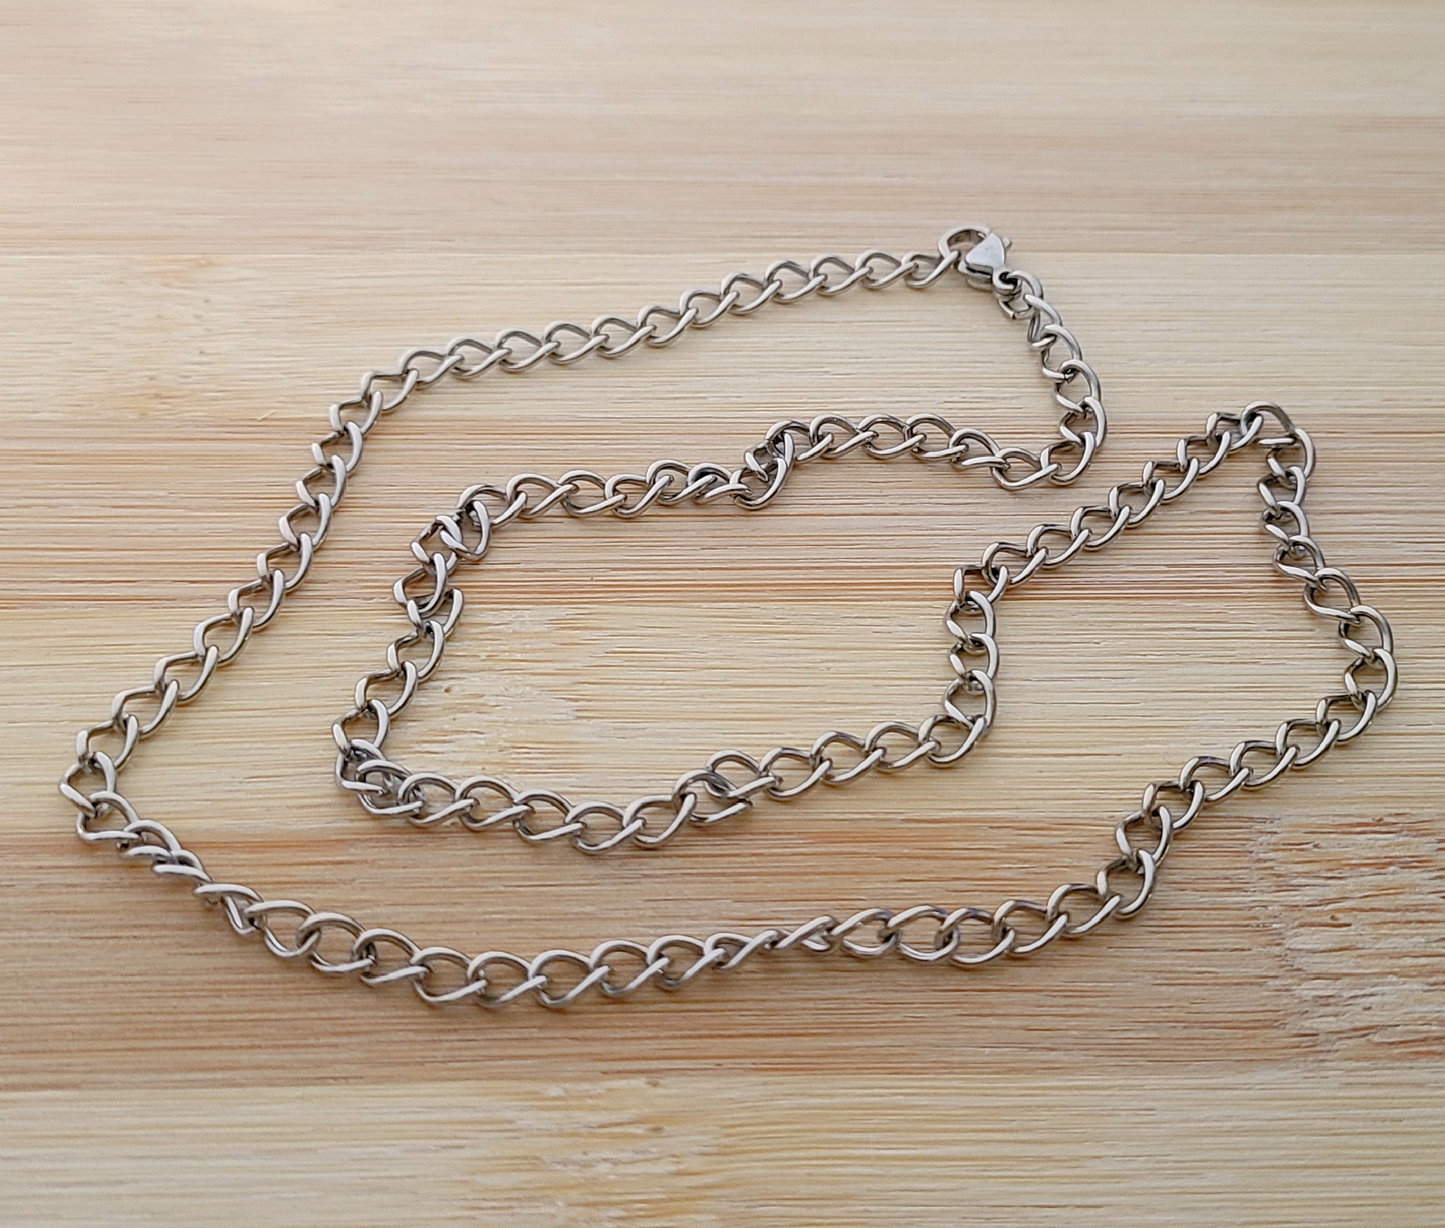 Stainless Steel Twist Chain Wrap Anklet